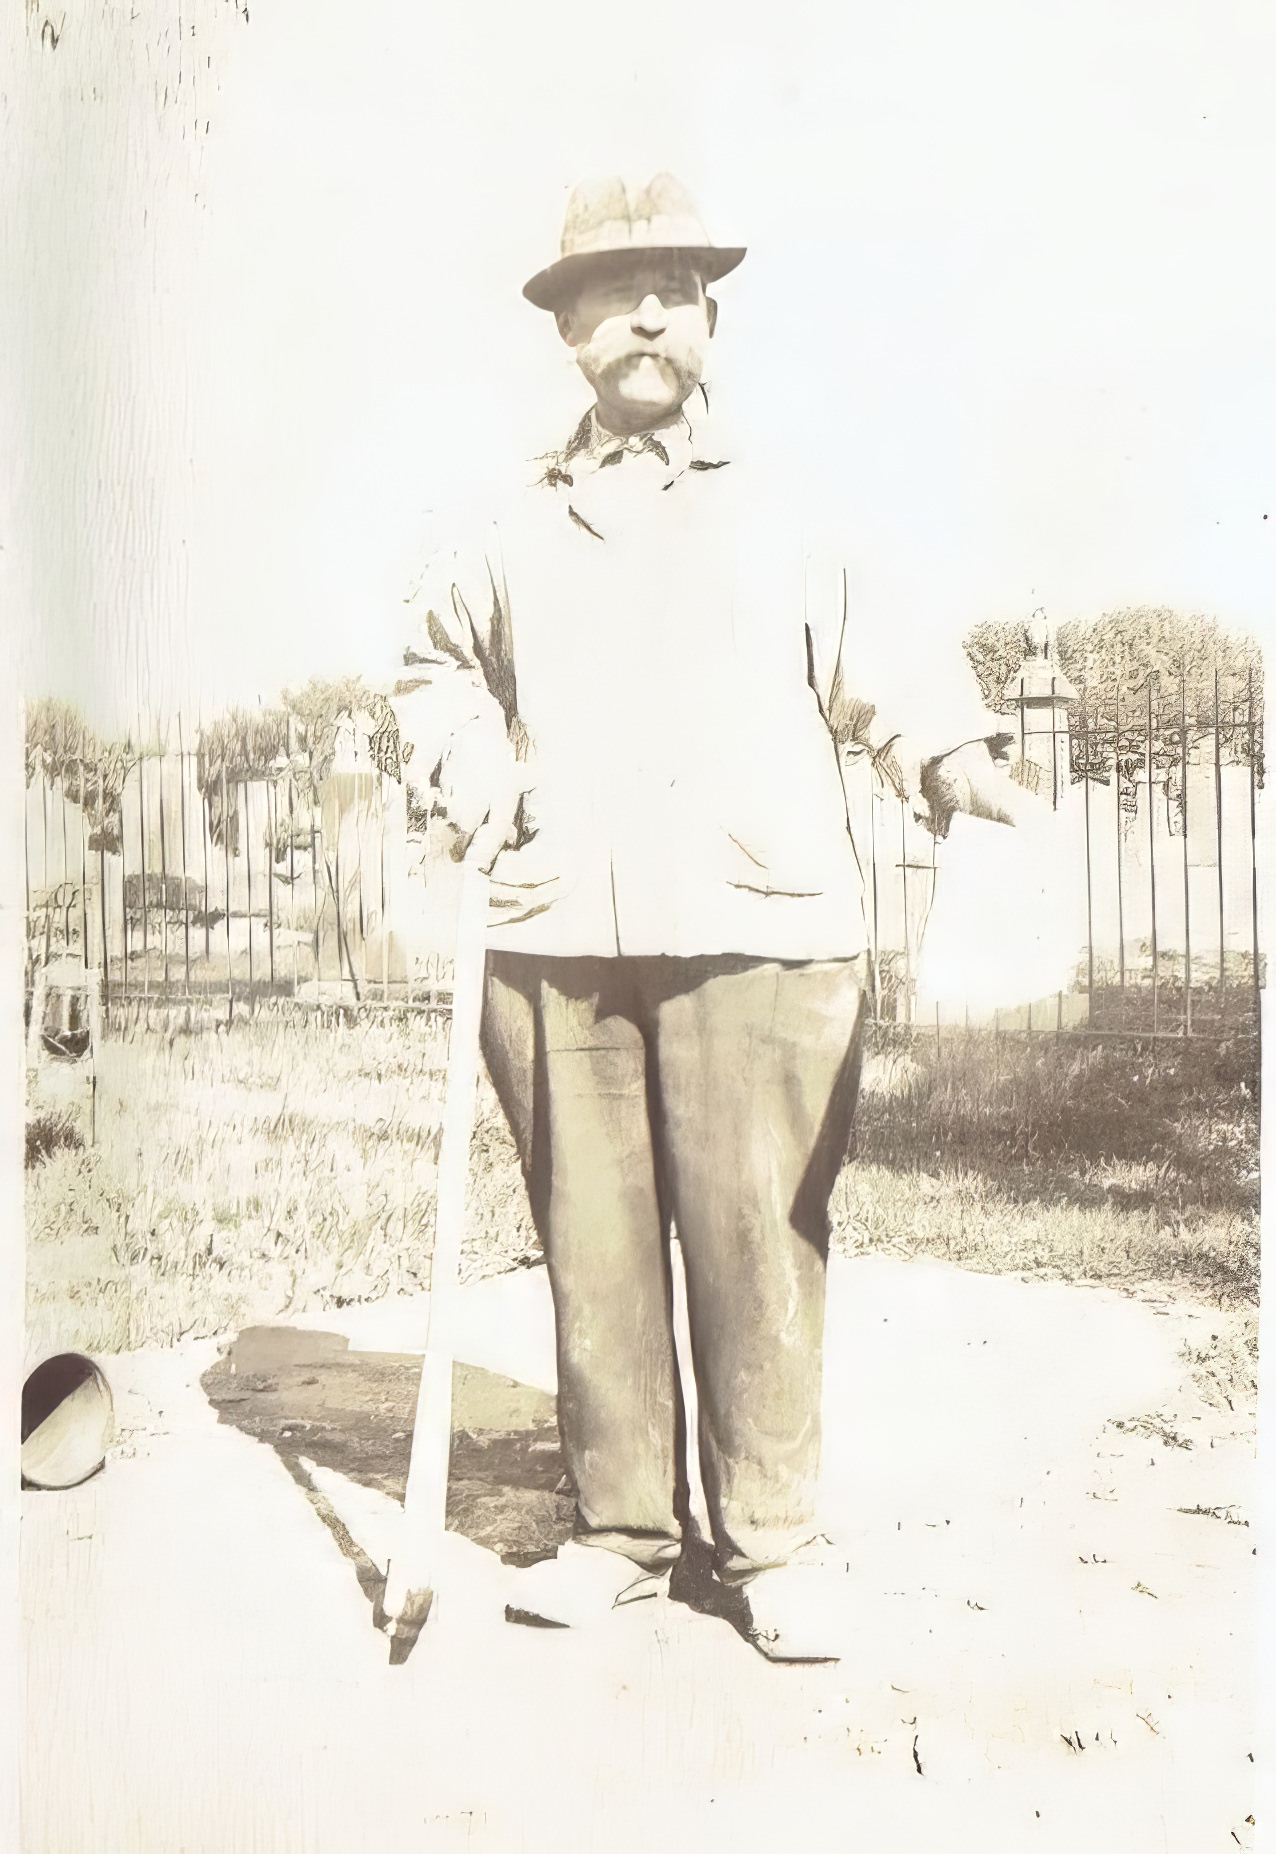 Rocco Felix, a participant in the Liberty Bond campaign to support the Allies in World War I, standing near St. Patrick's Cemetery, Geneva, circa 1917